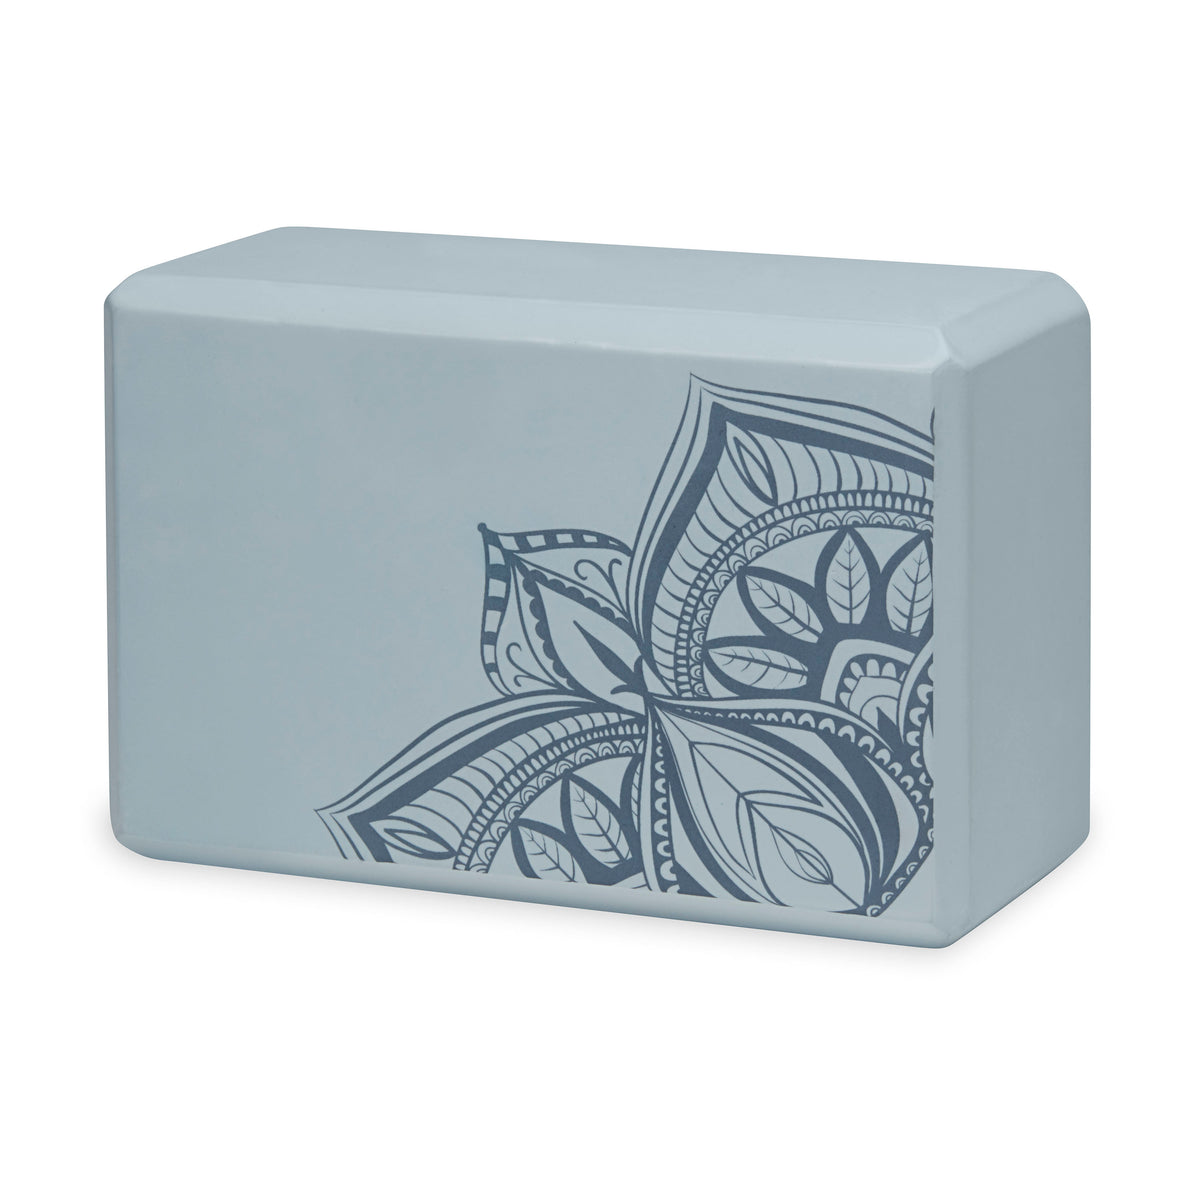 Gaiam Printed Yoga Block Lakeside Point front angle